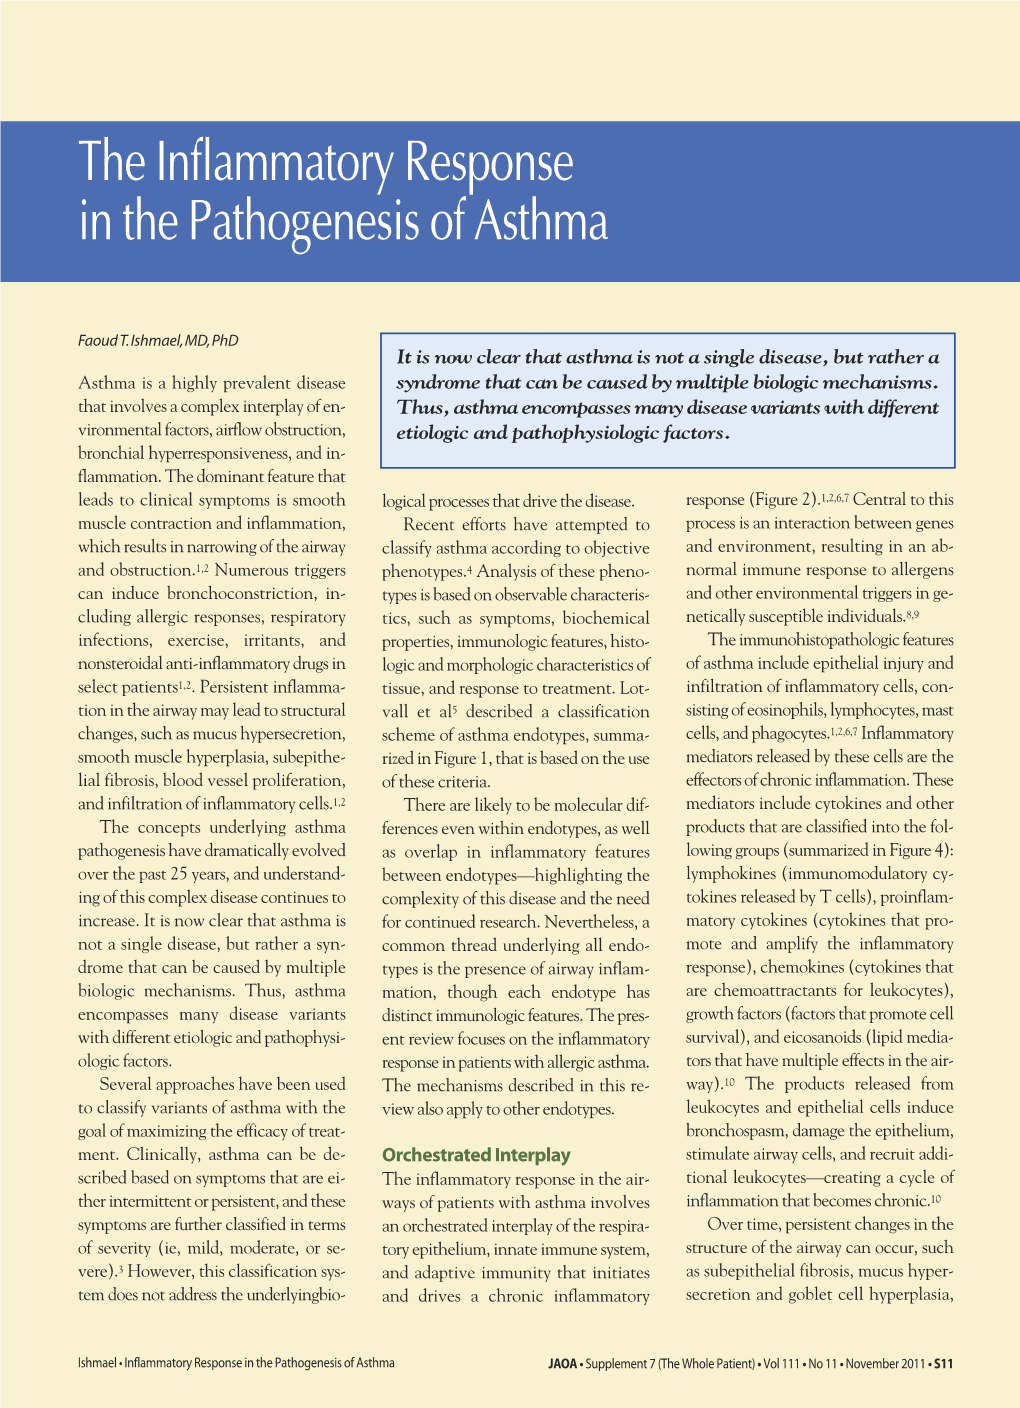 The Inflammatory Response in the Pathogenesis of Asthma